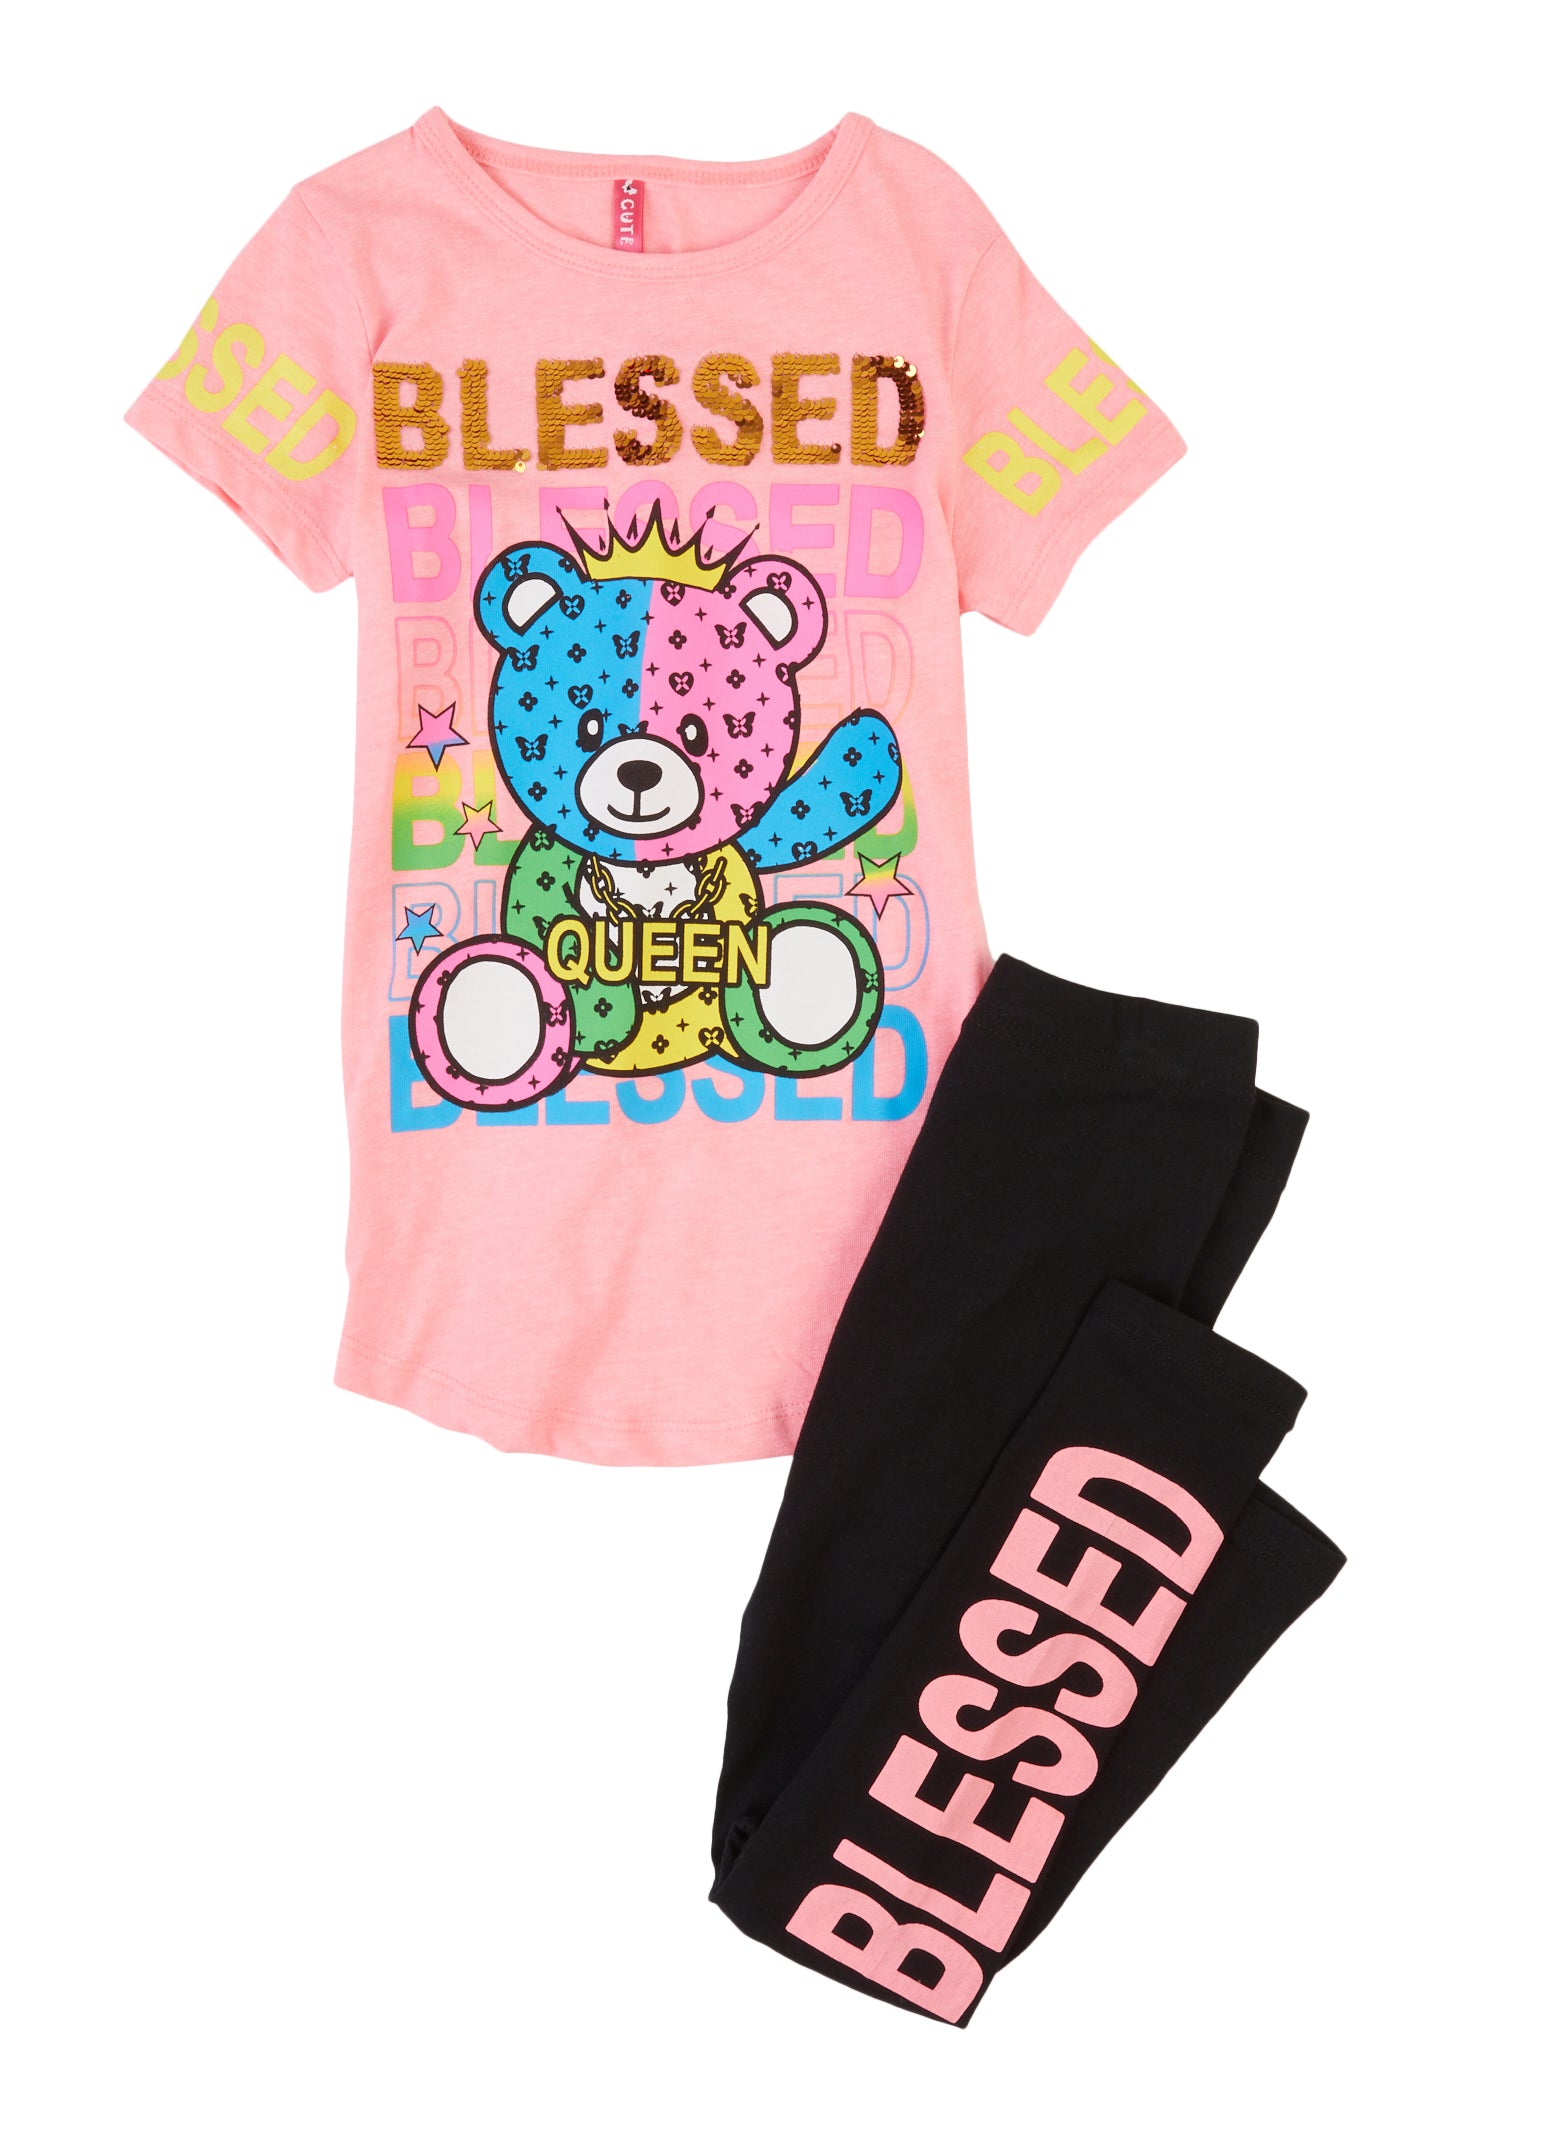 Little Girls Blessed Reversible Sequin Graphic Tee and Leggings, Pink, Size 5-6